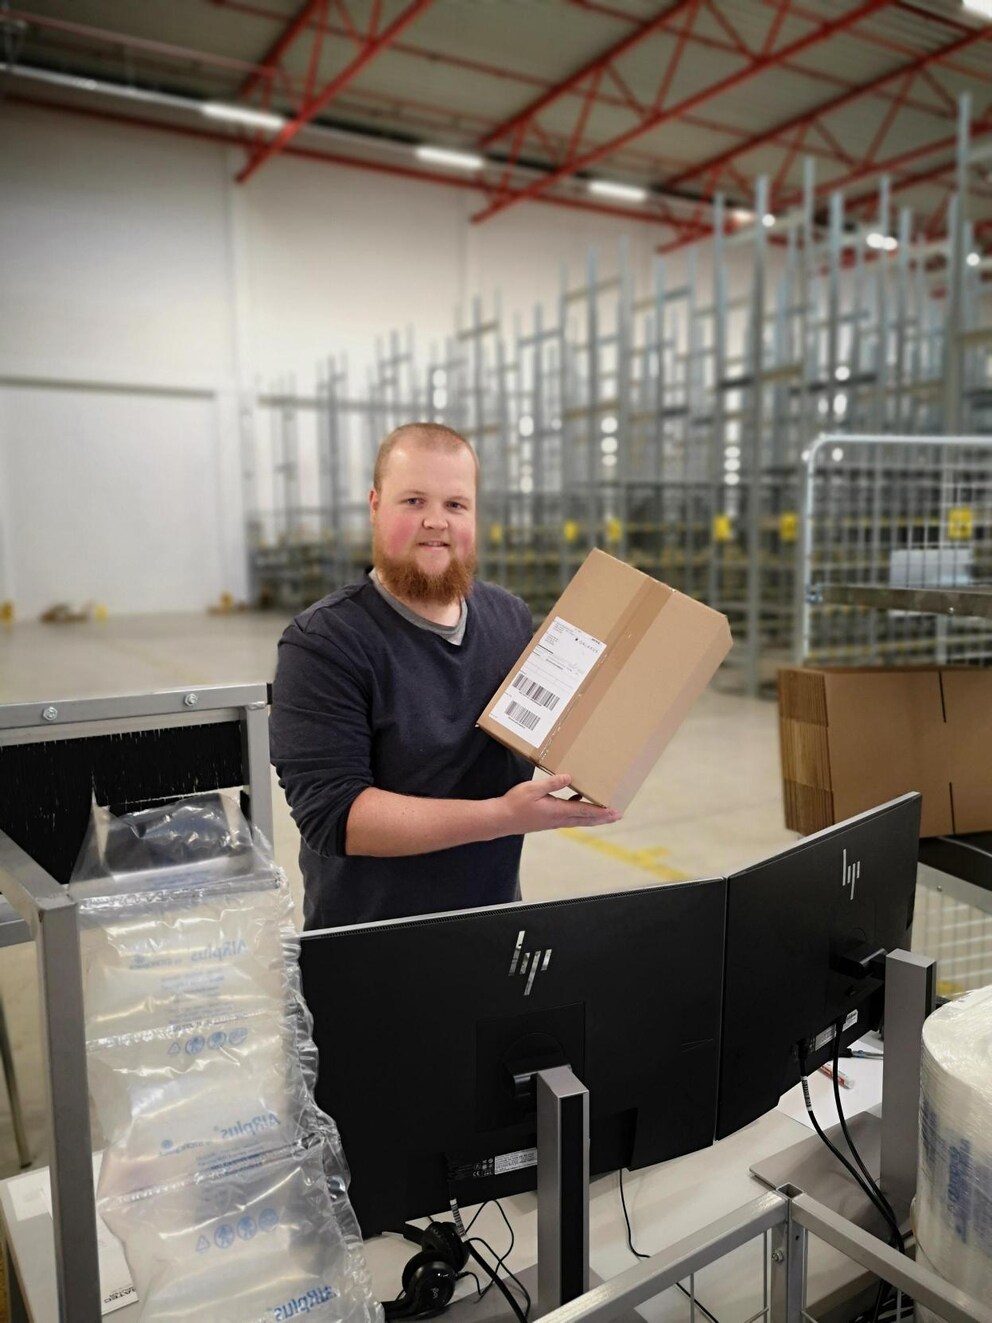 Steffen Beniers dispatched the first parcel in 2018 and is still with Galaxus as Head of Logistics in Krefeld.